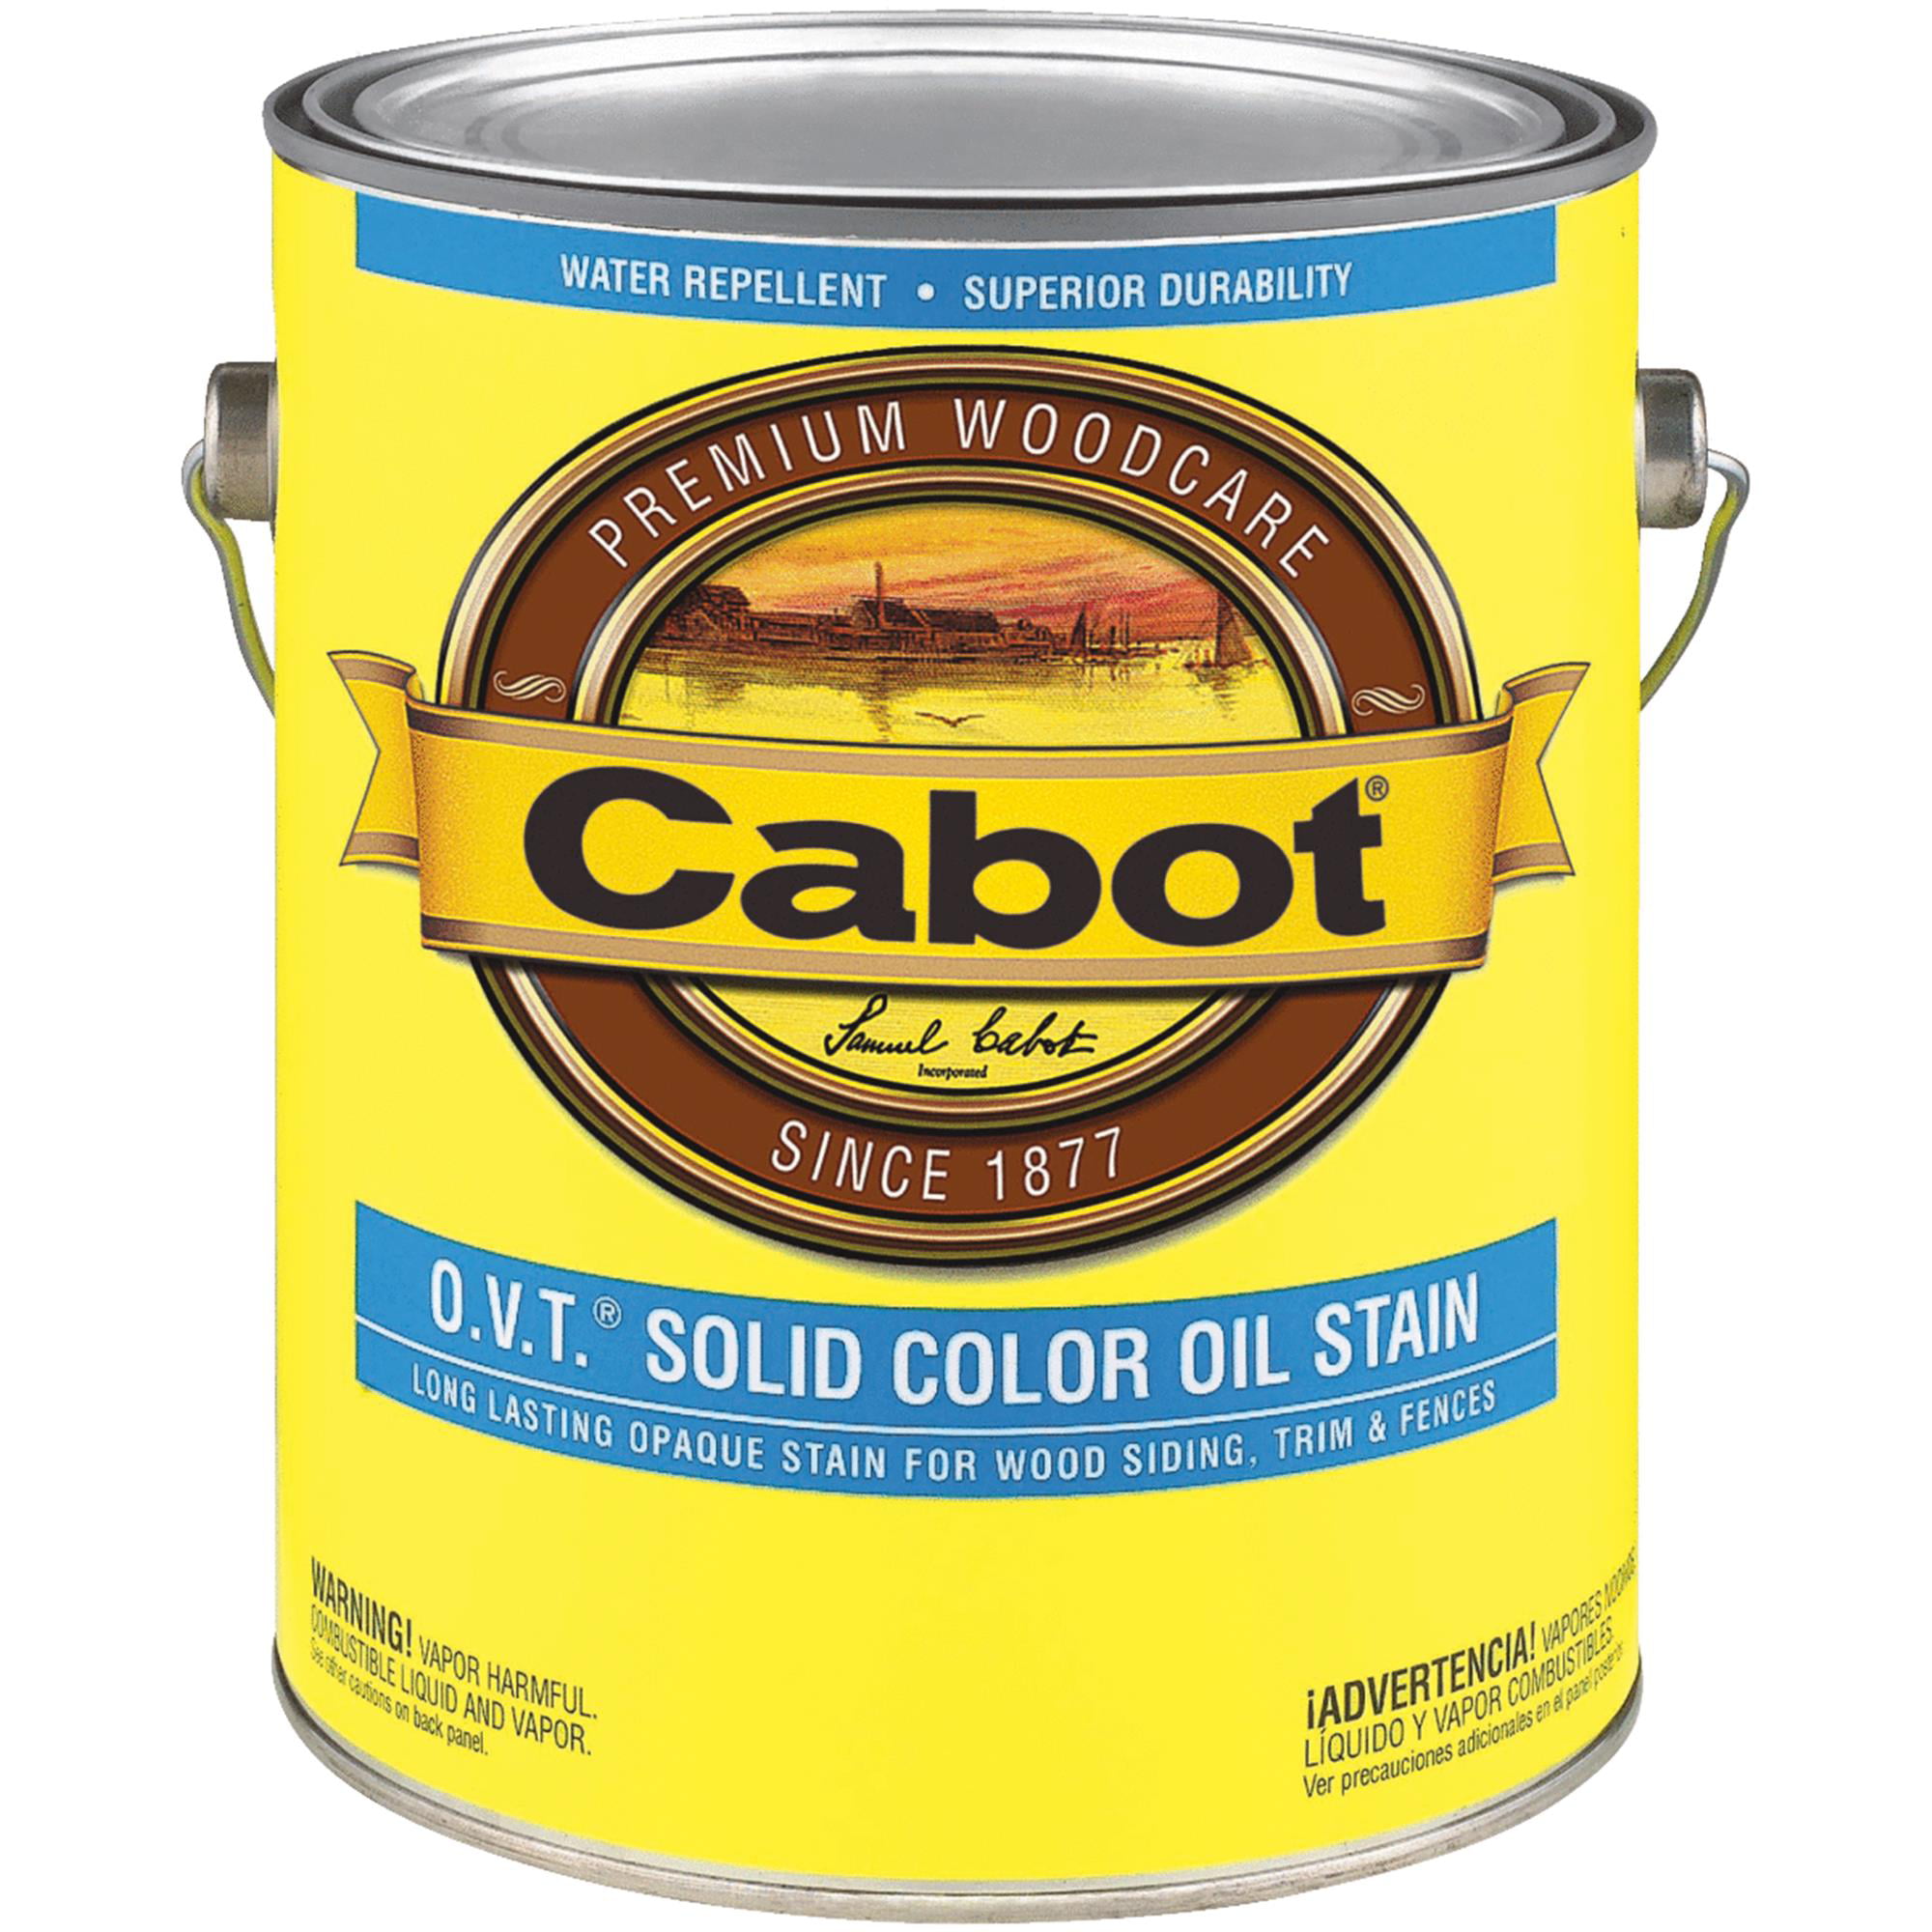 Is Cabot Solid Stain Good